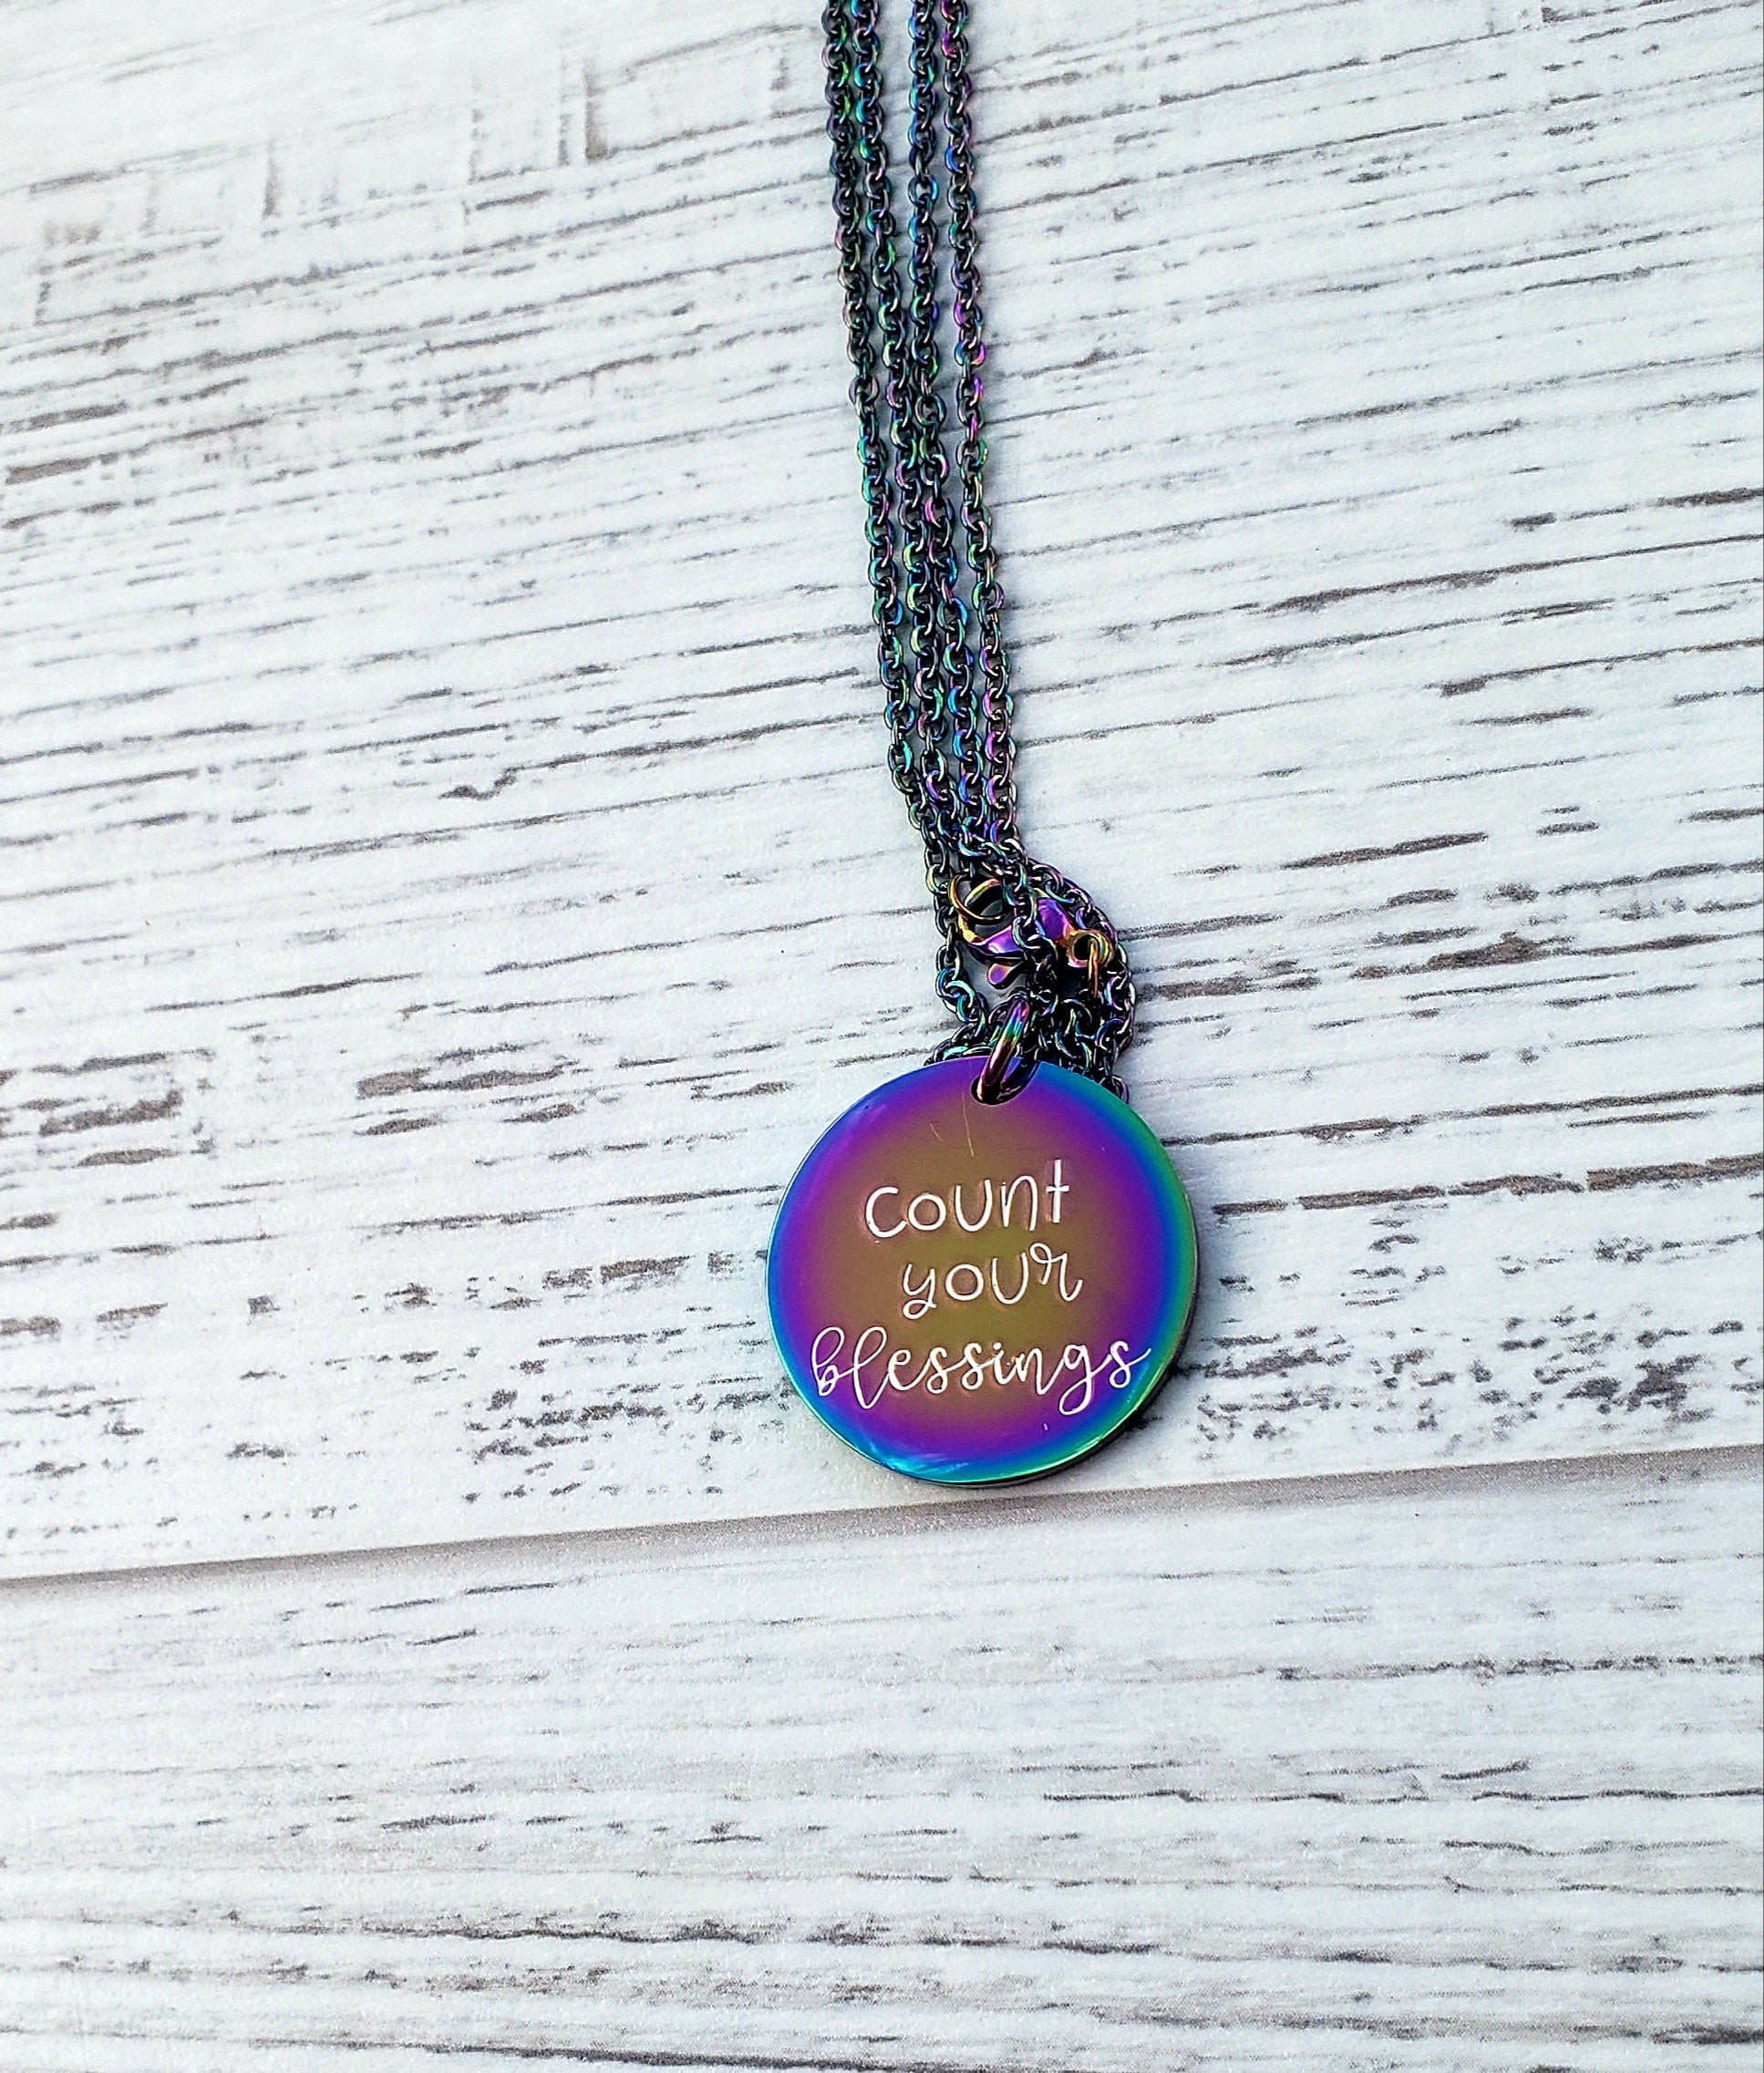 Count Your Blessings Necklace